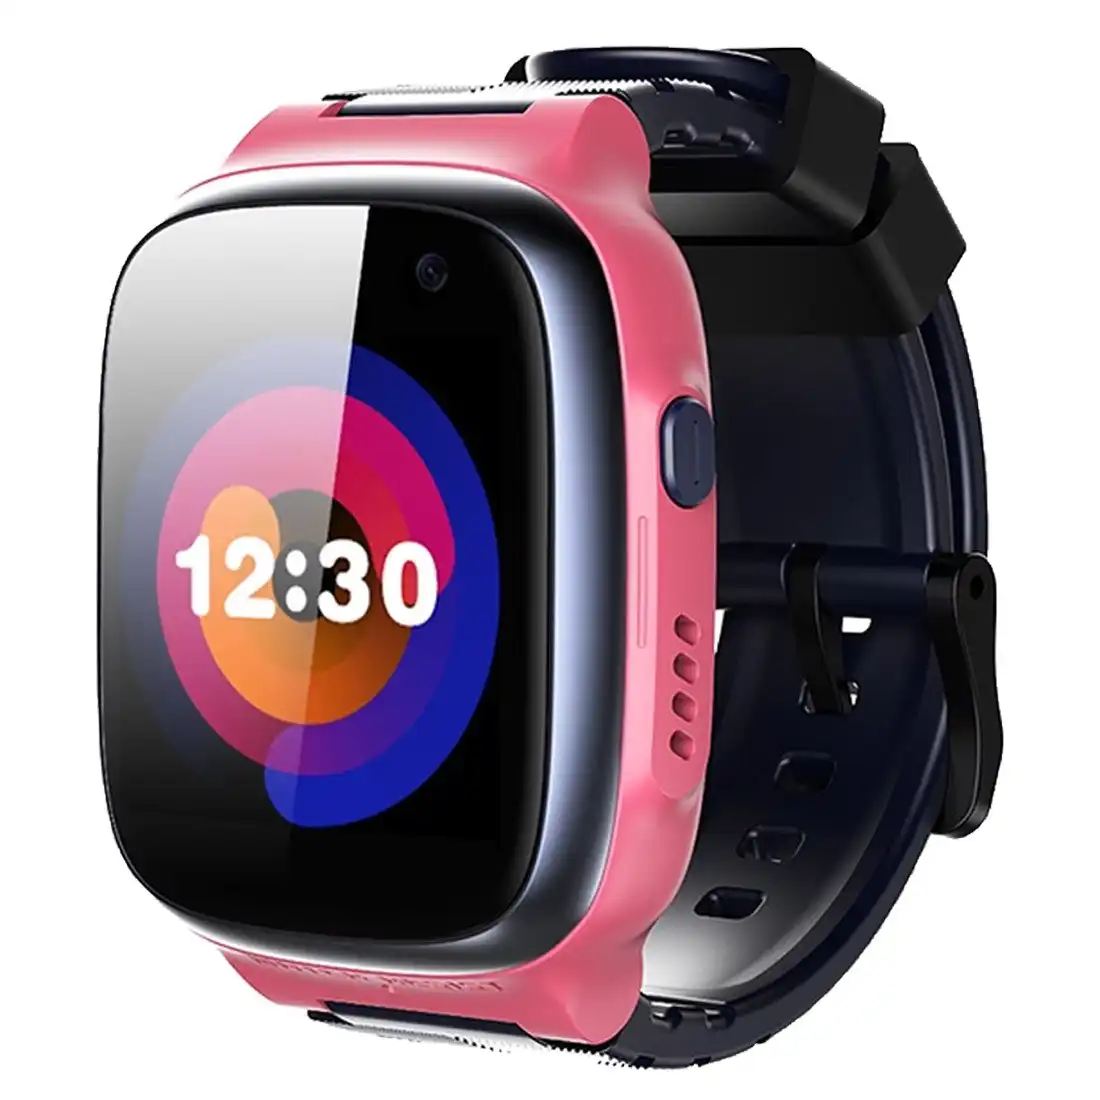 360 Kids Smart Watch E1 (4G/LTE, IPX8, Patch Trace, Video call, 1 Click SOS)